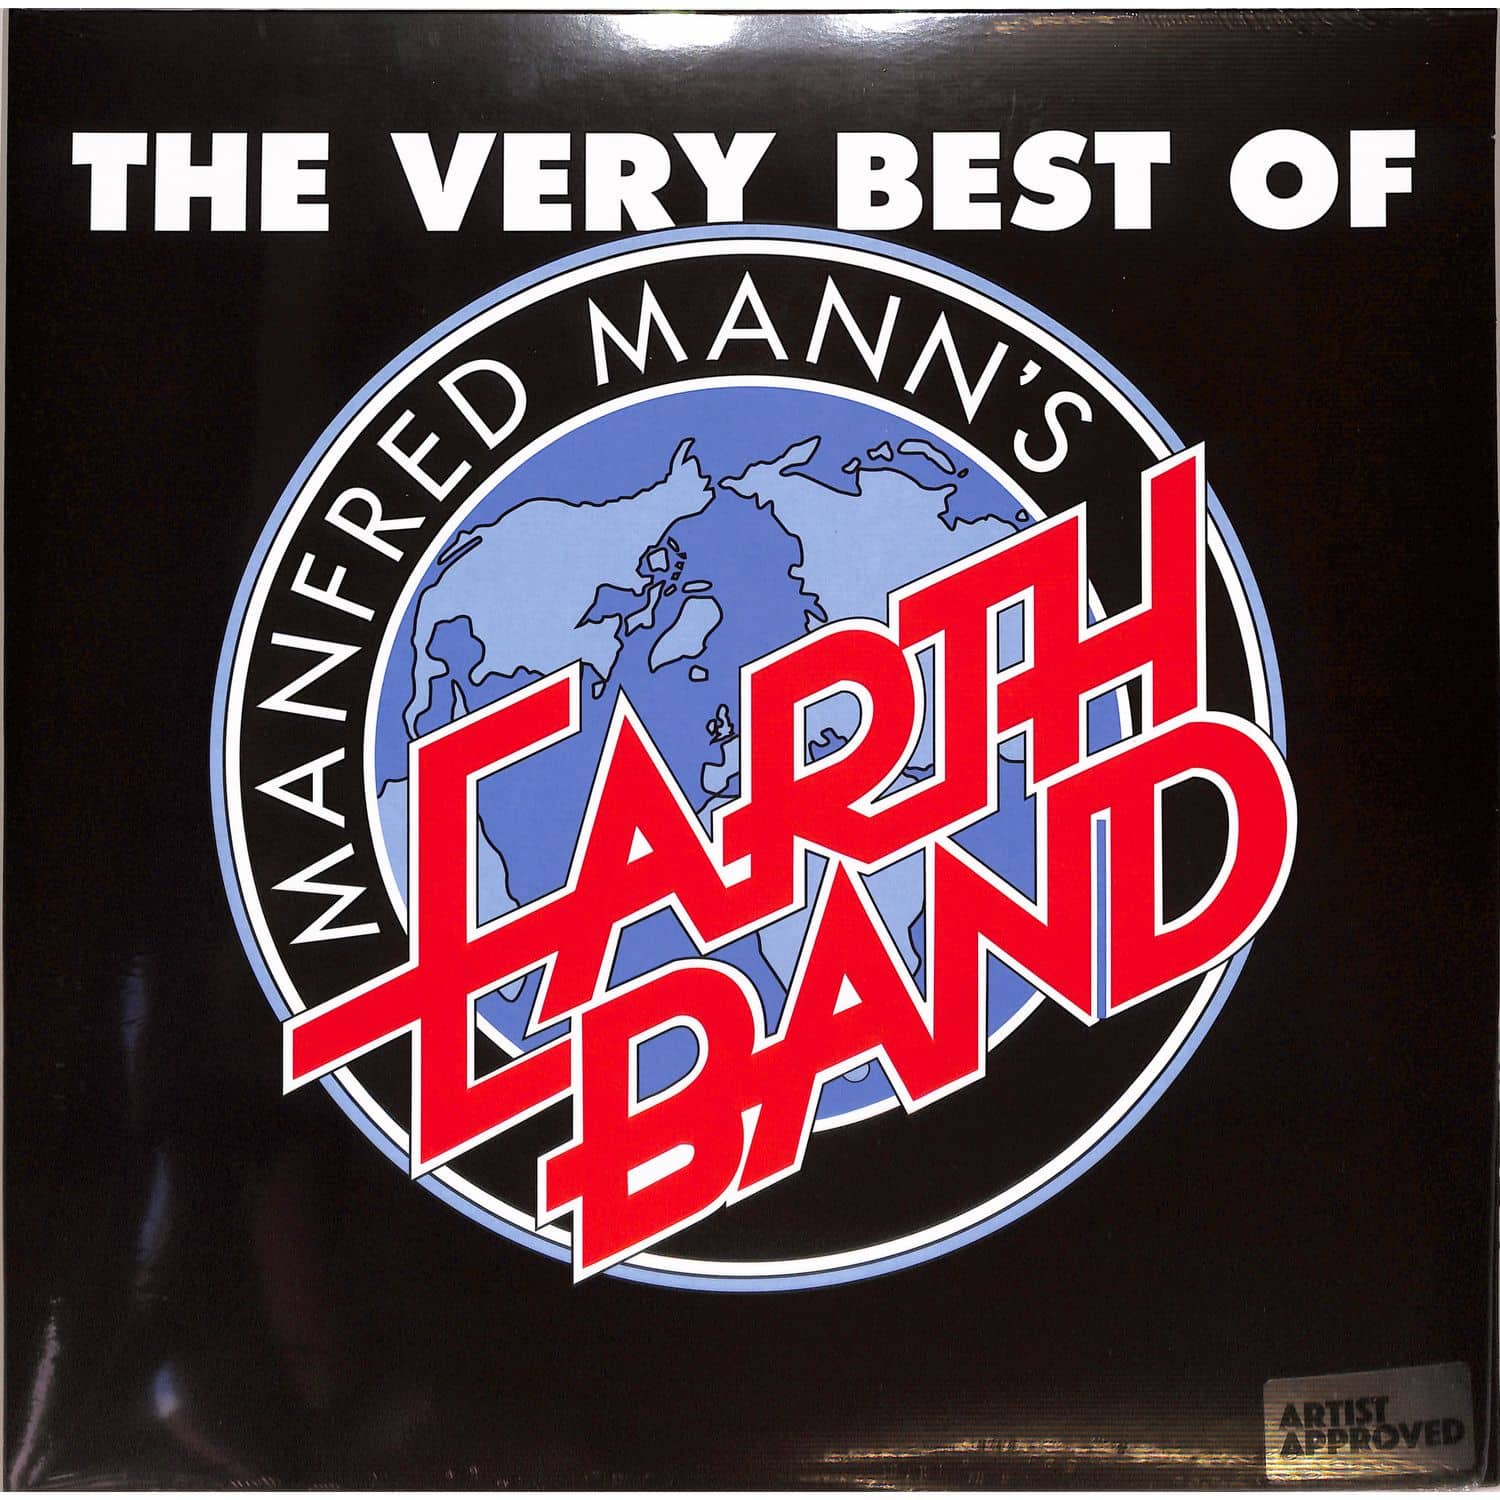 Manfred Manns Earth Band - THE VERY BEST OF 